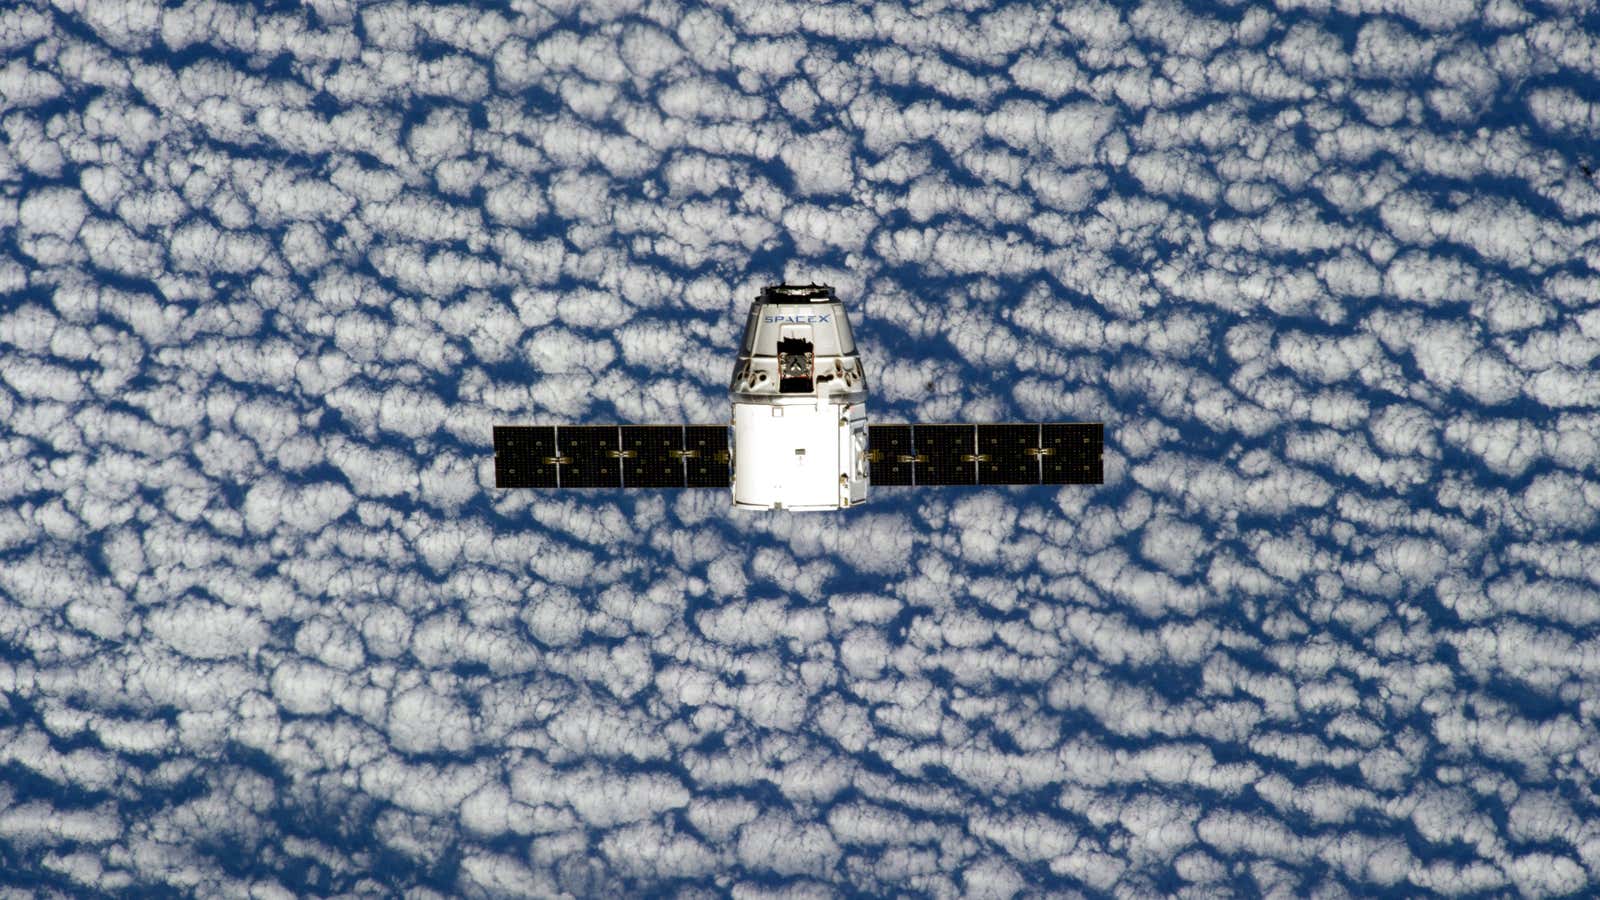 SpaceX’s Dragon spacecraft has approached the ISS before.